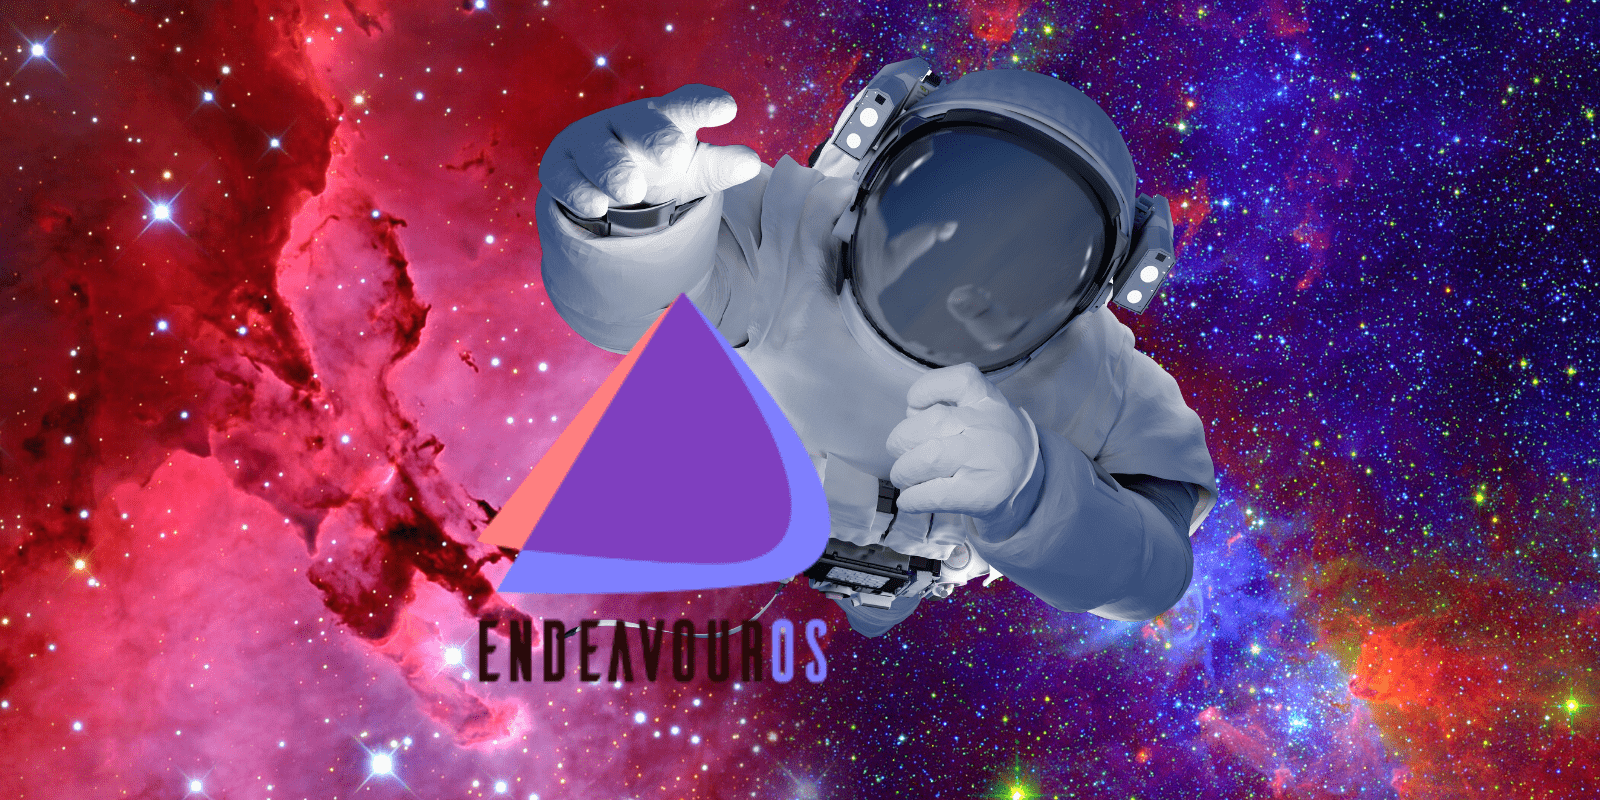 Exploring the stars with EndeavourOS